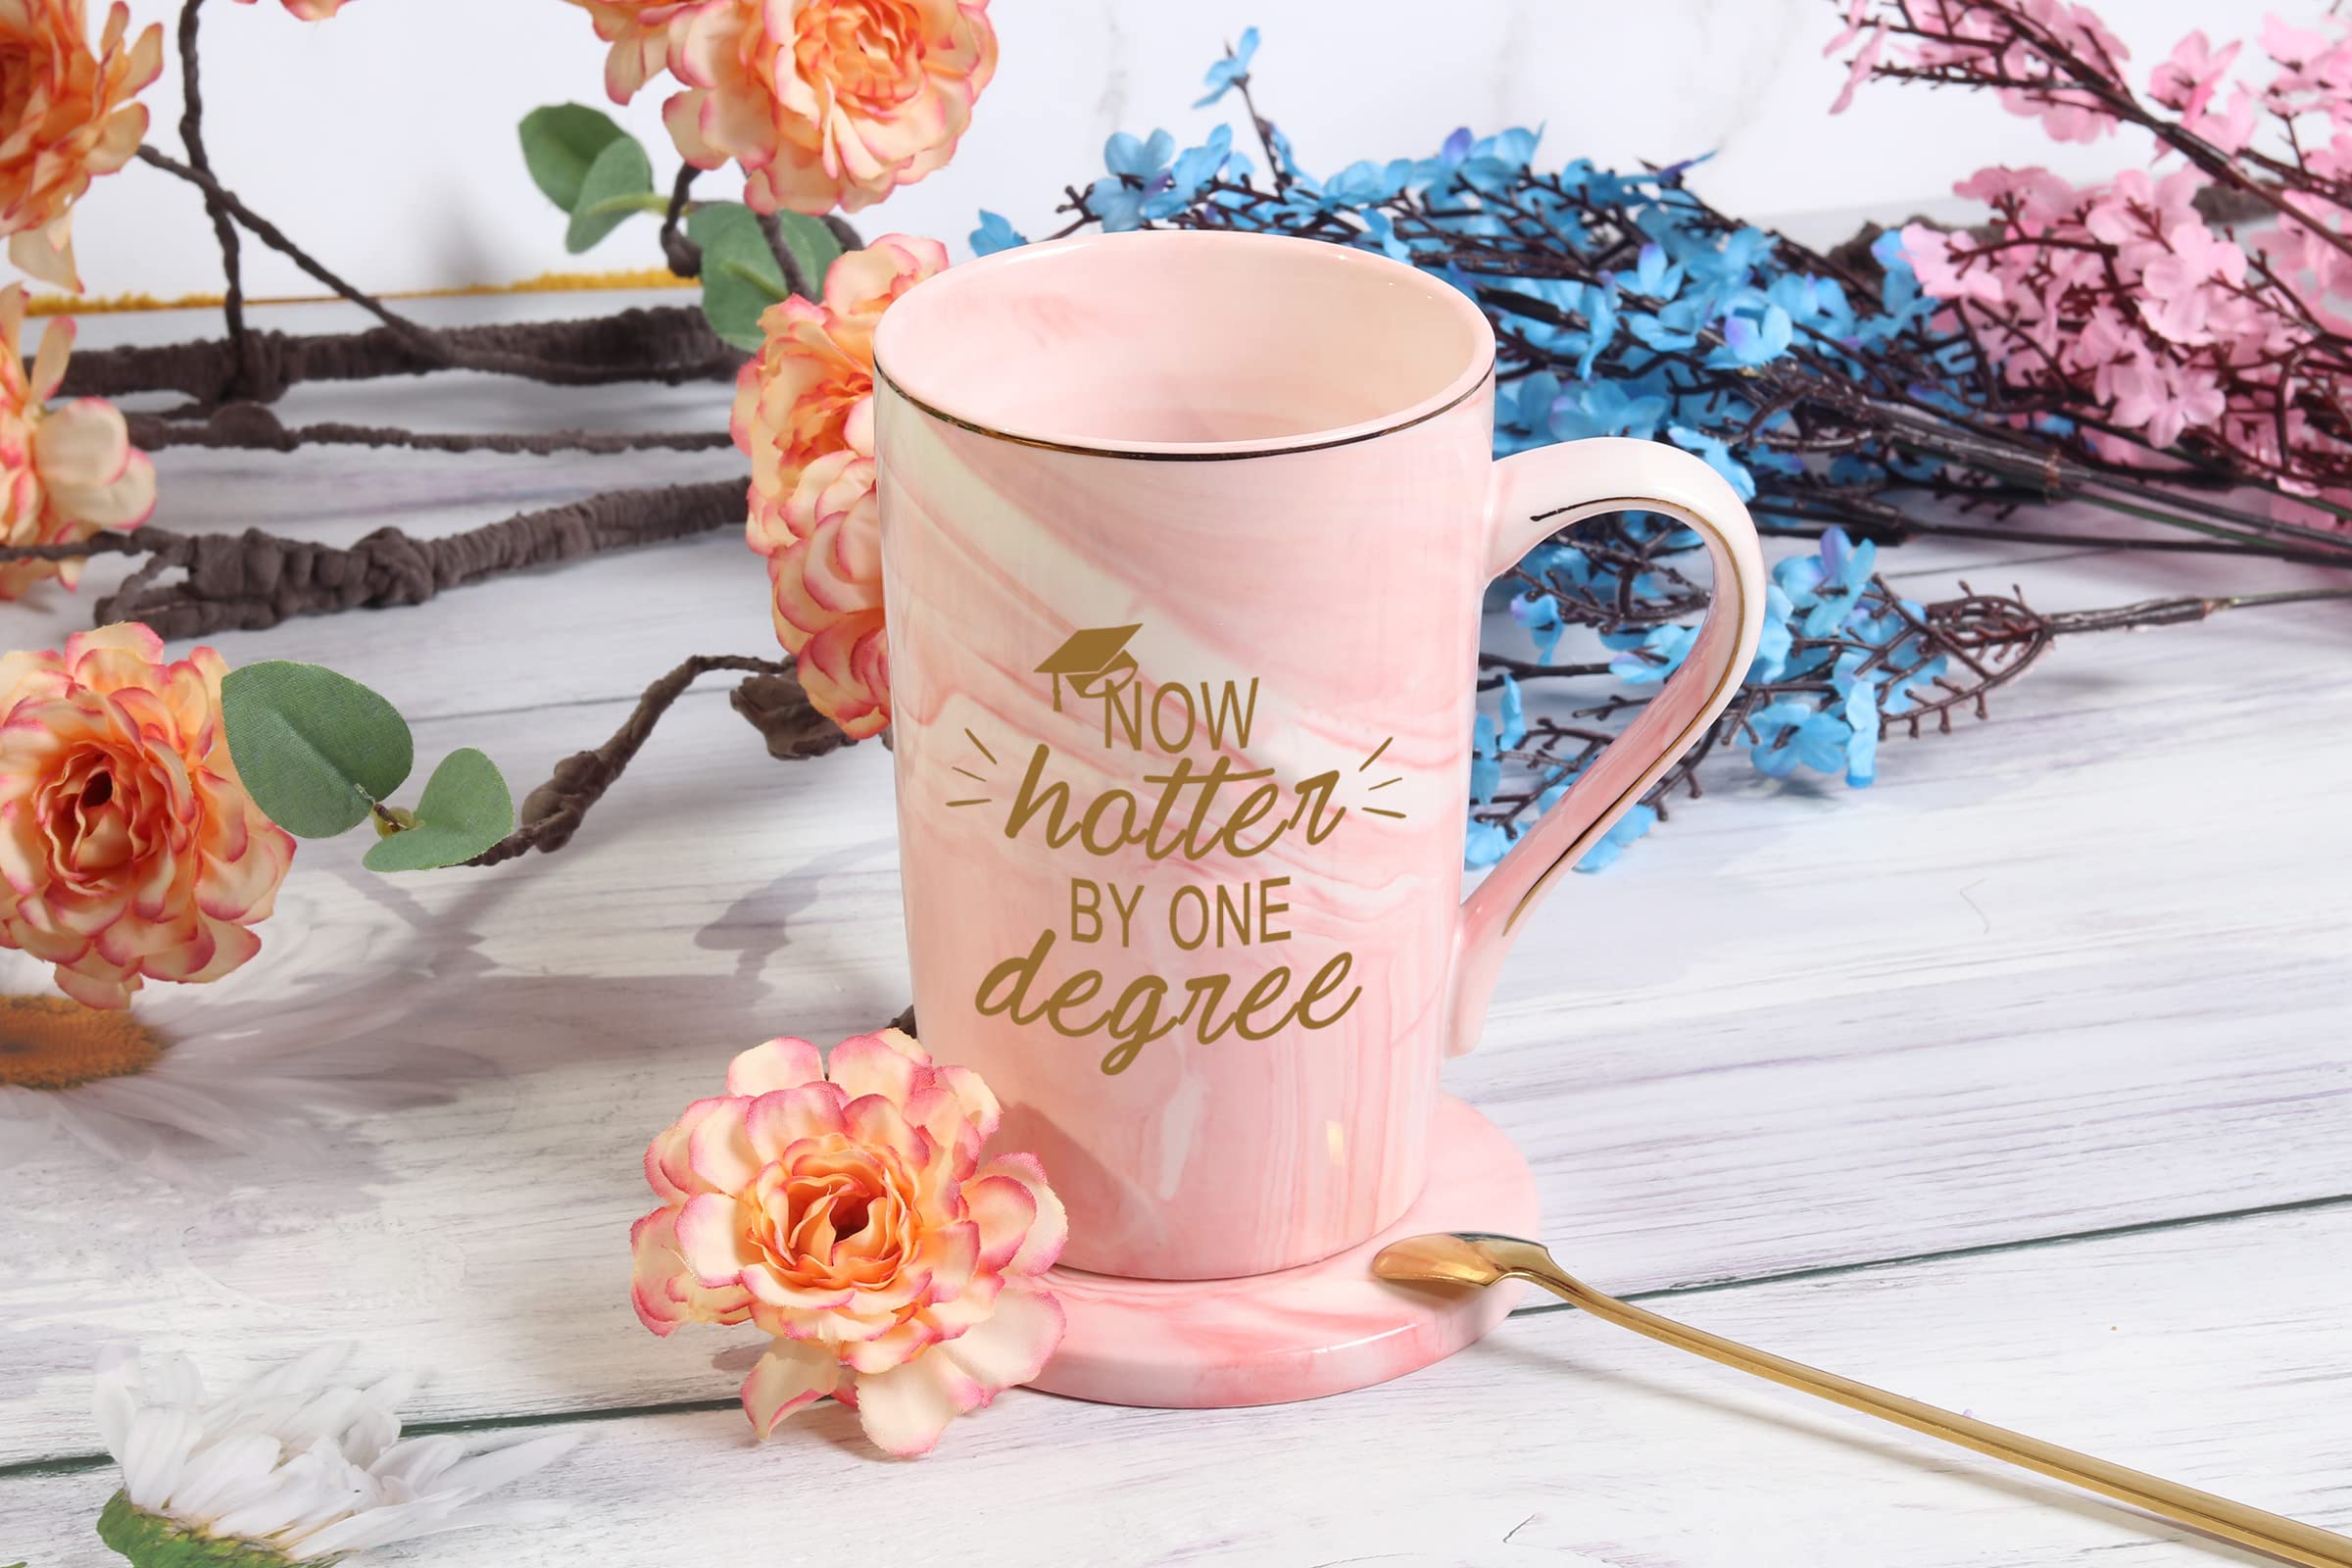 WENSSY Graduation Gifts for Her Now Hotter by One Degree Mug Gifts for College High School Graduates Men's Female College High School Graduation Gifts for Friends 14 Ounce Pink with Box Spoon Coaster